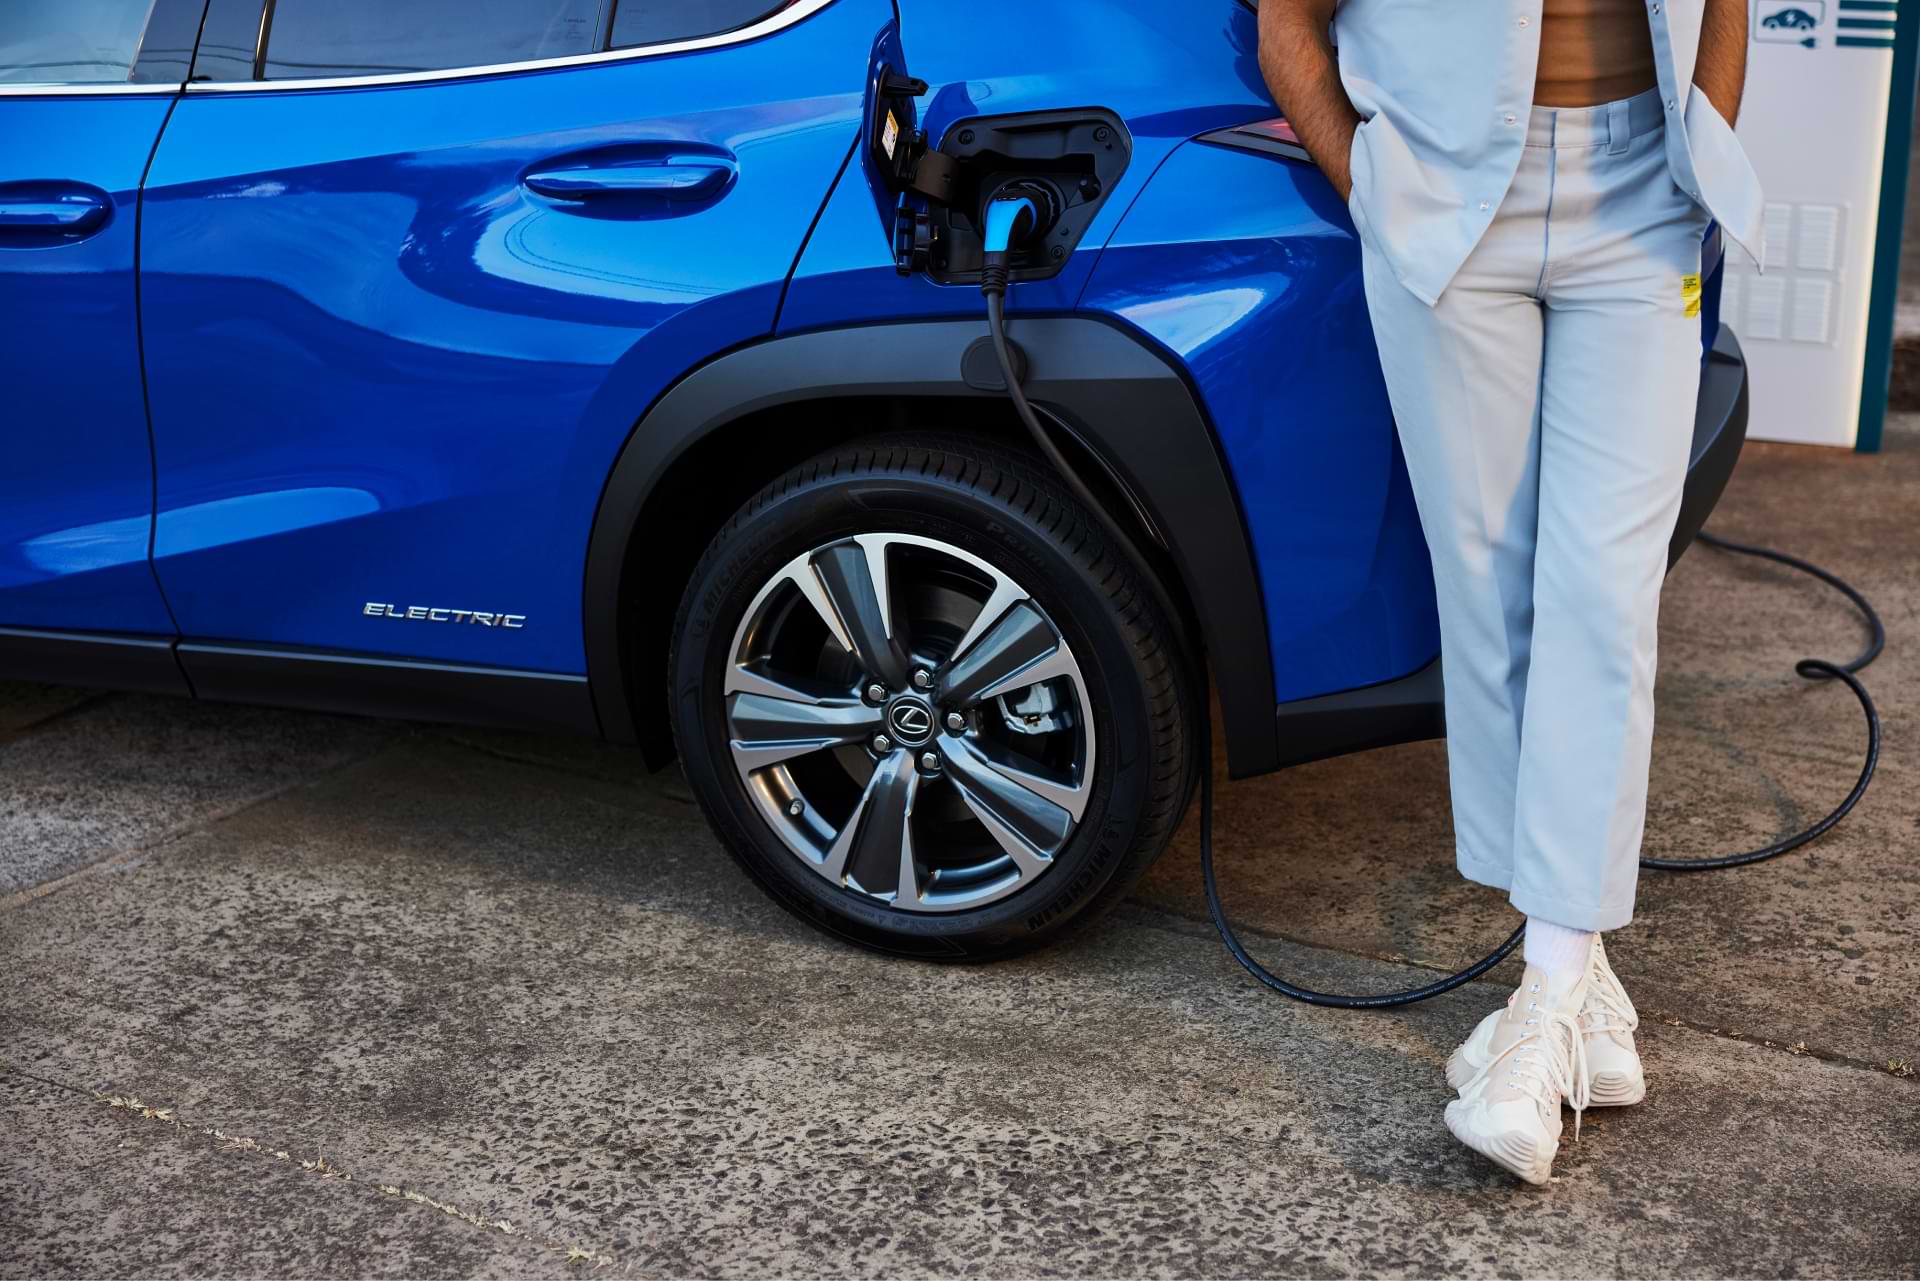 A UX 300e sits charging. The legs of a man leaning against the car as also pictured as he stands next to the charging plug.